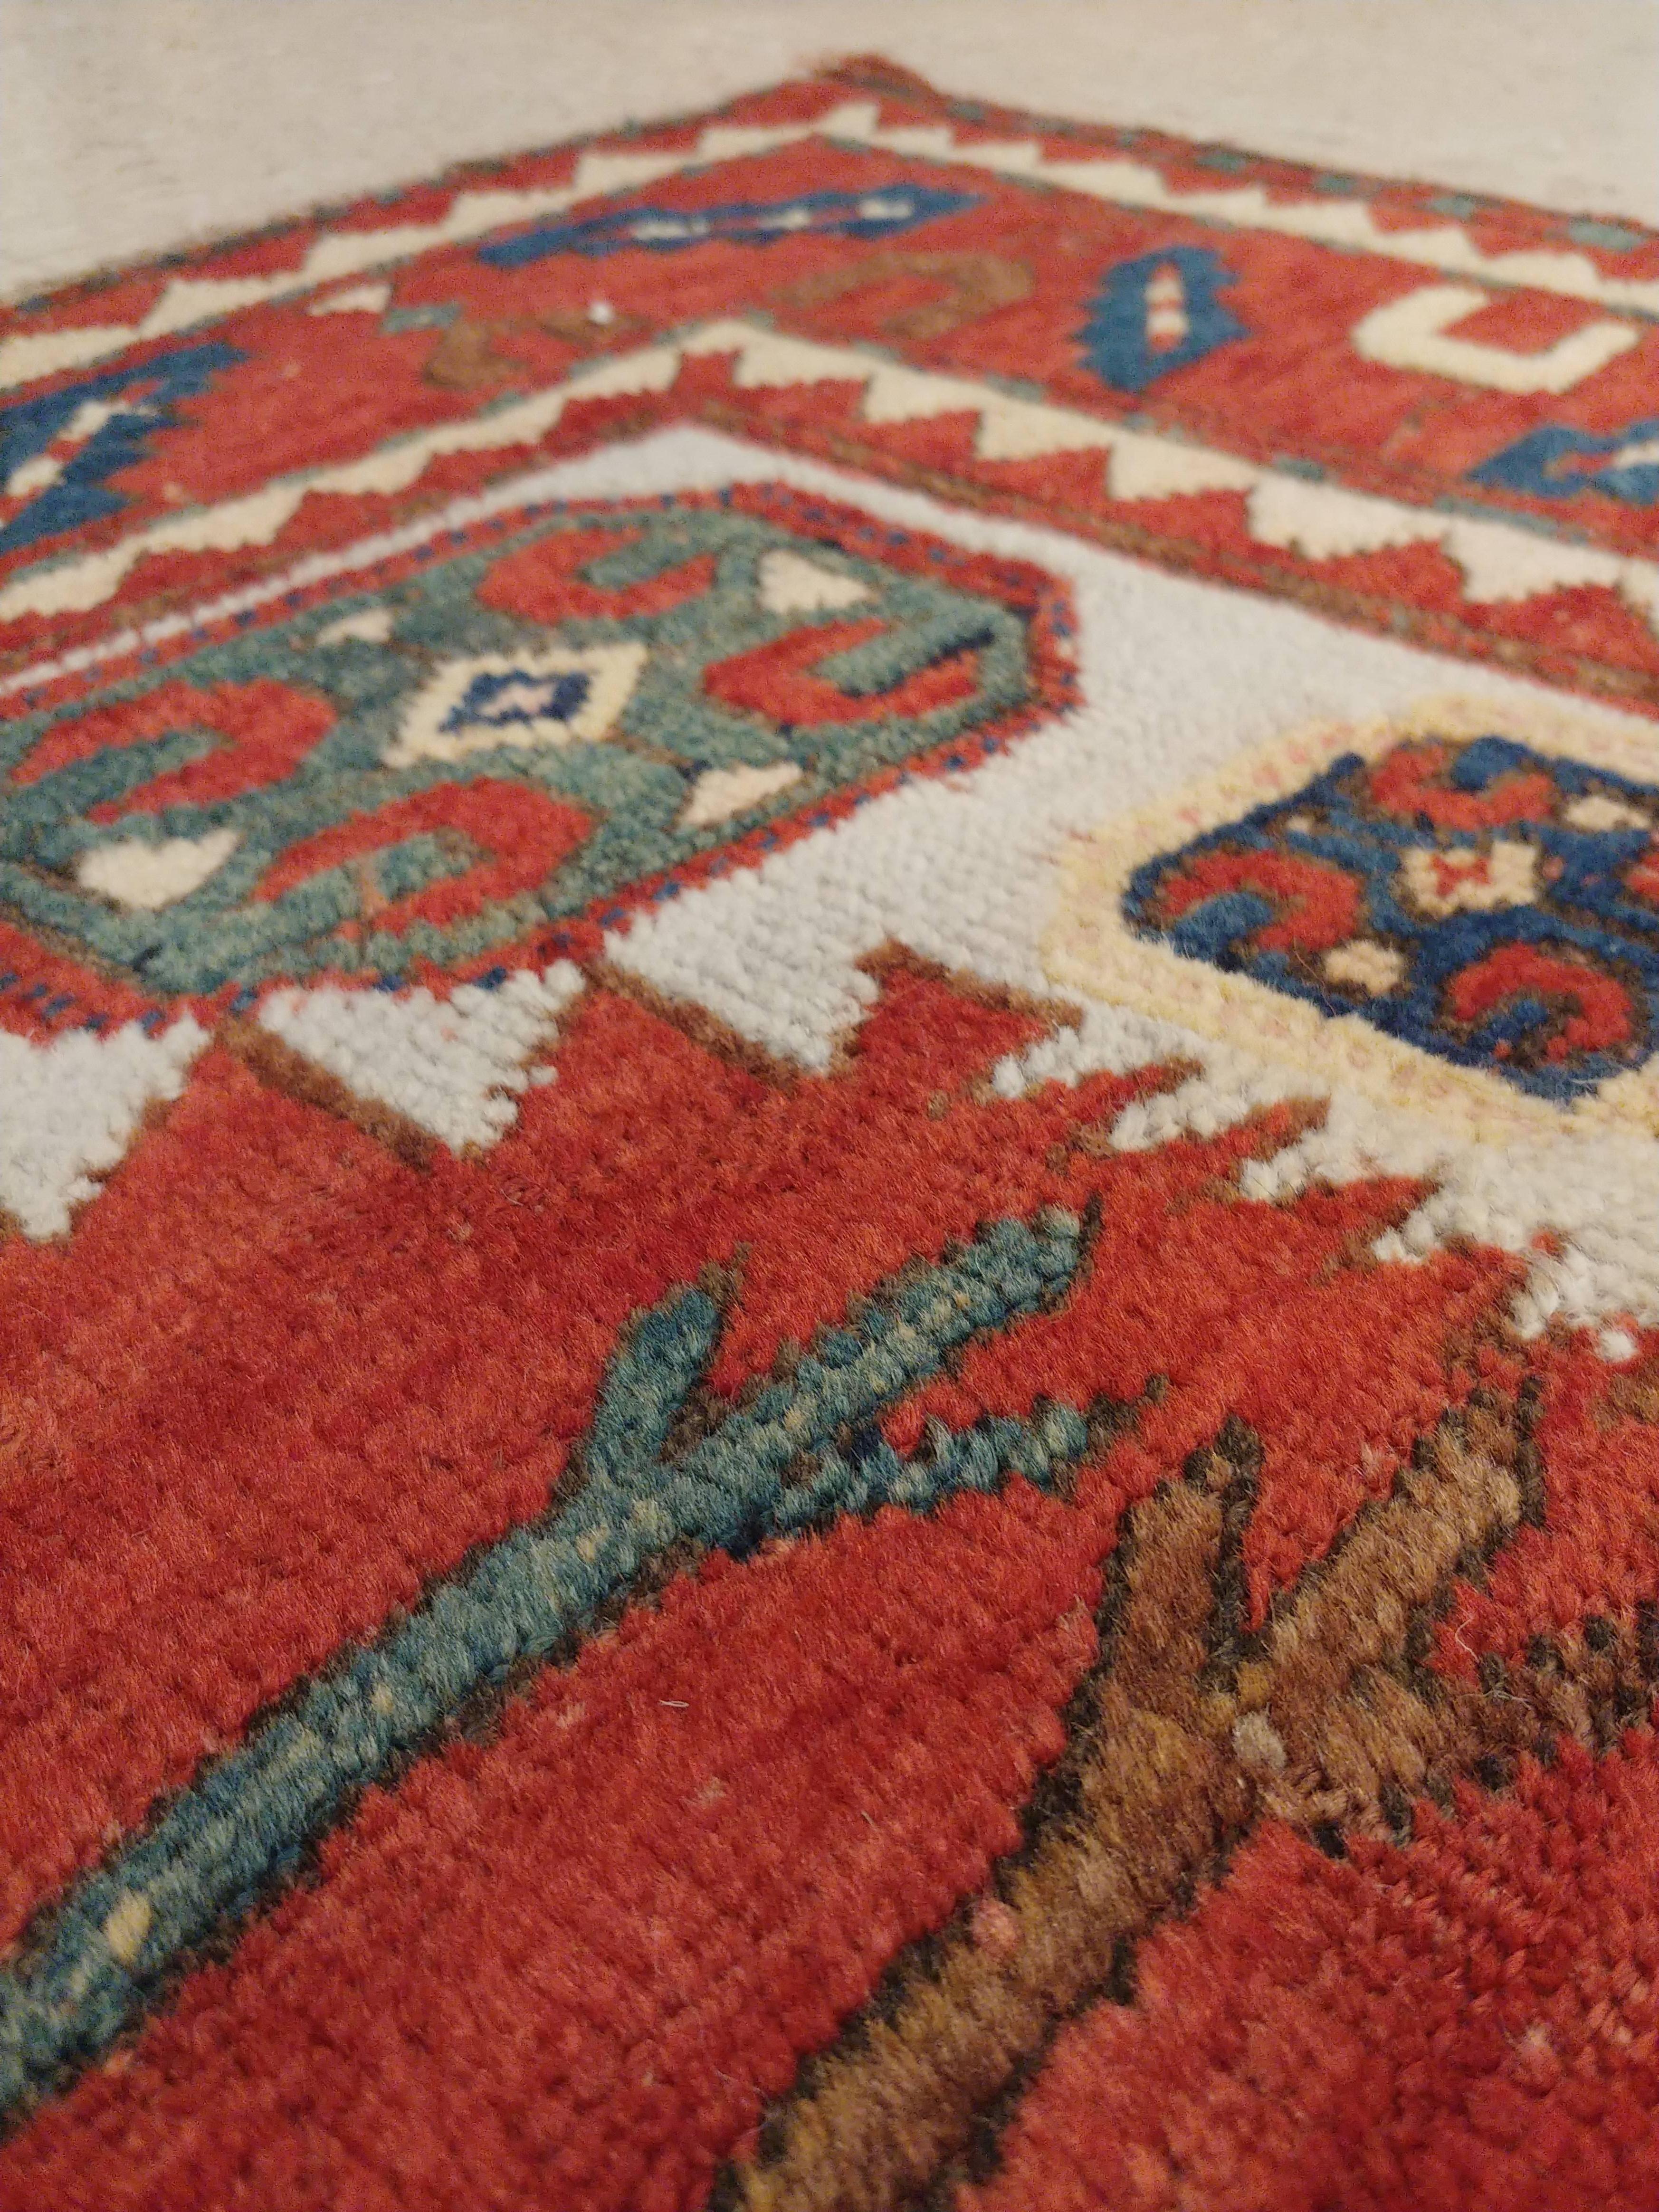 Karachov Kazak: A quite famous and seldom-found design type, usually attributed to the Armenian weavers of the high Caucasus Mountains. The best of the Karachov rugs (also spelled Karachoph) are stunning beautiful 19th century antique Oriental rugs,